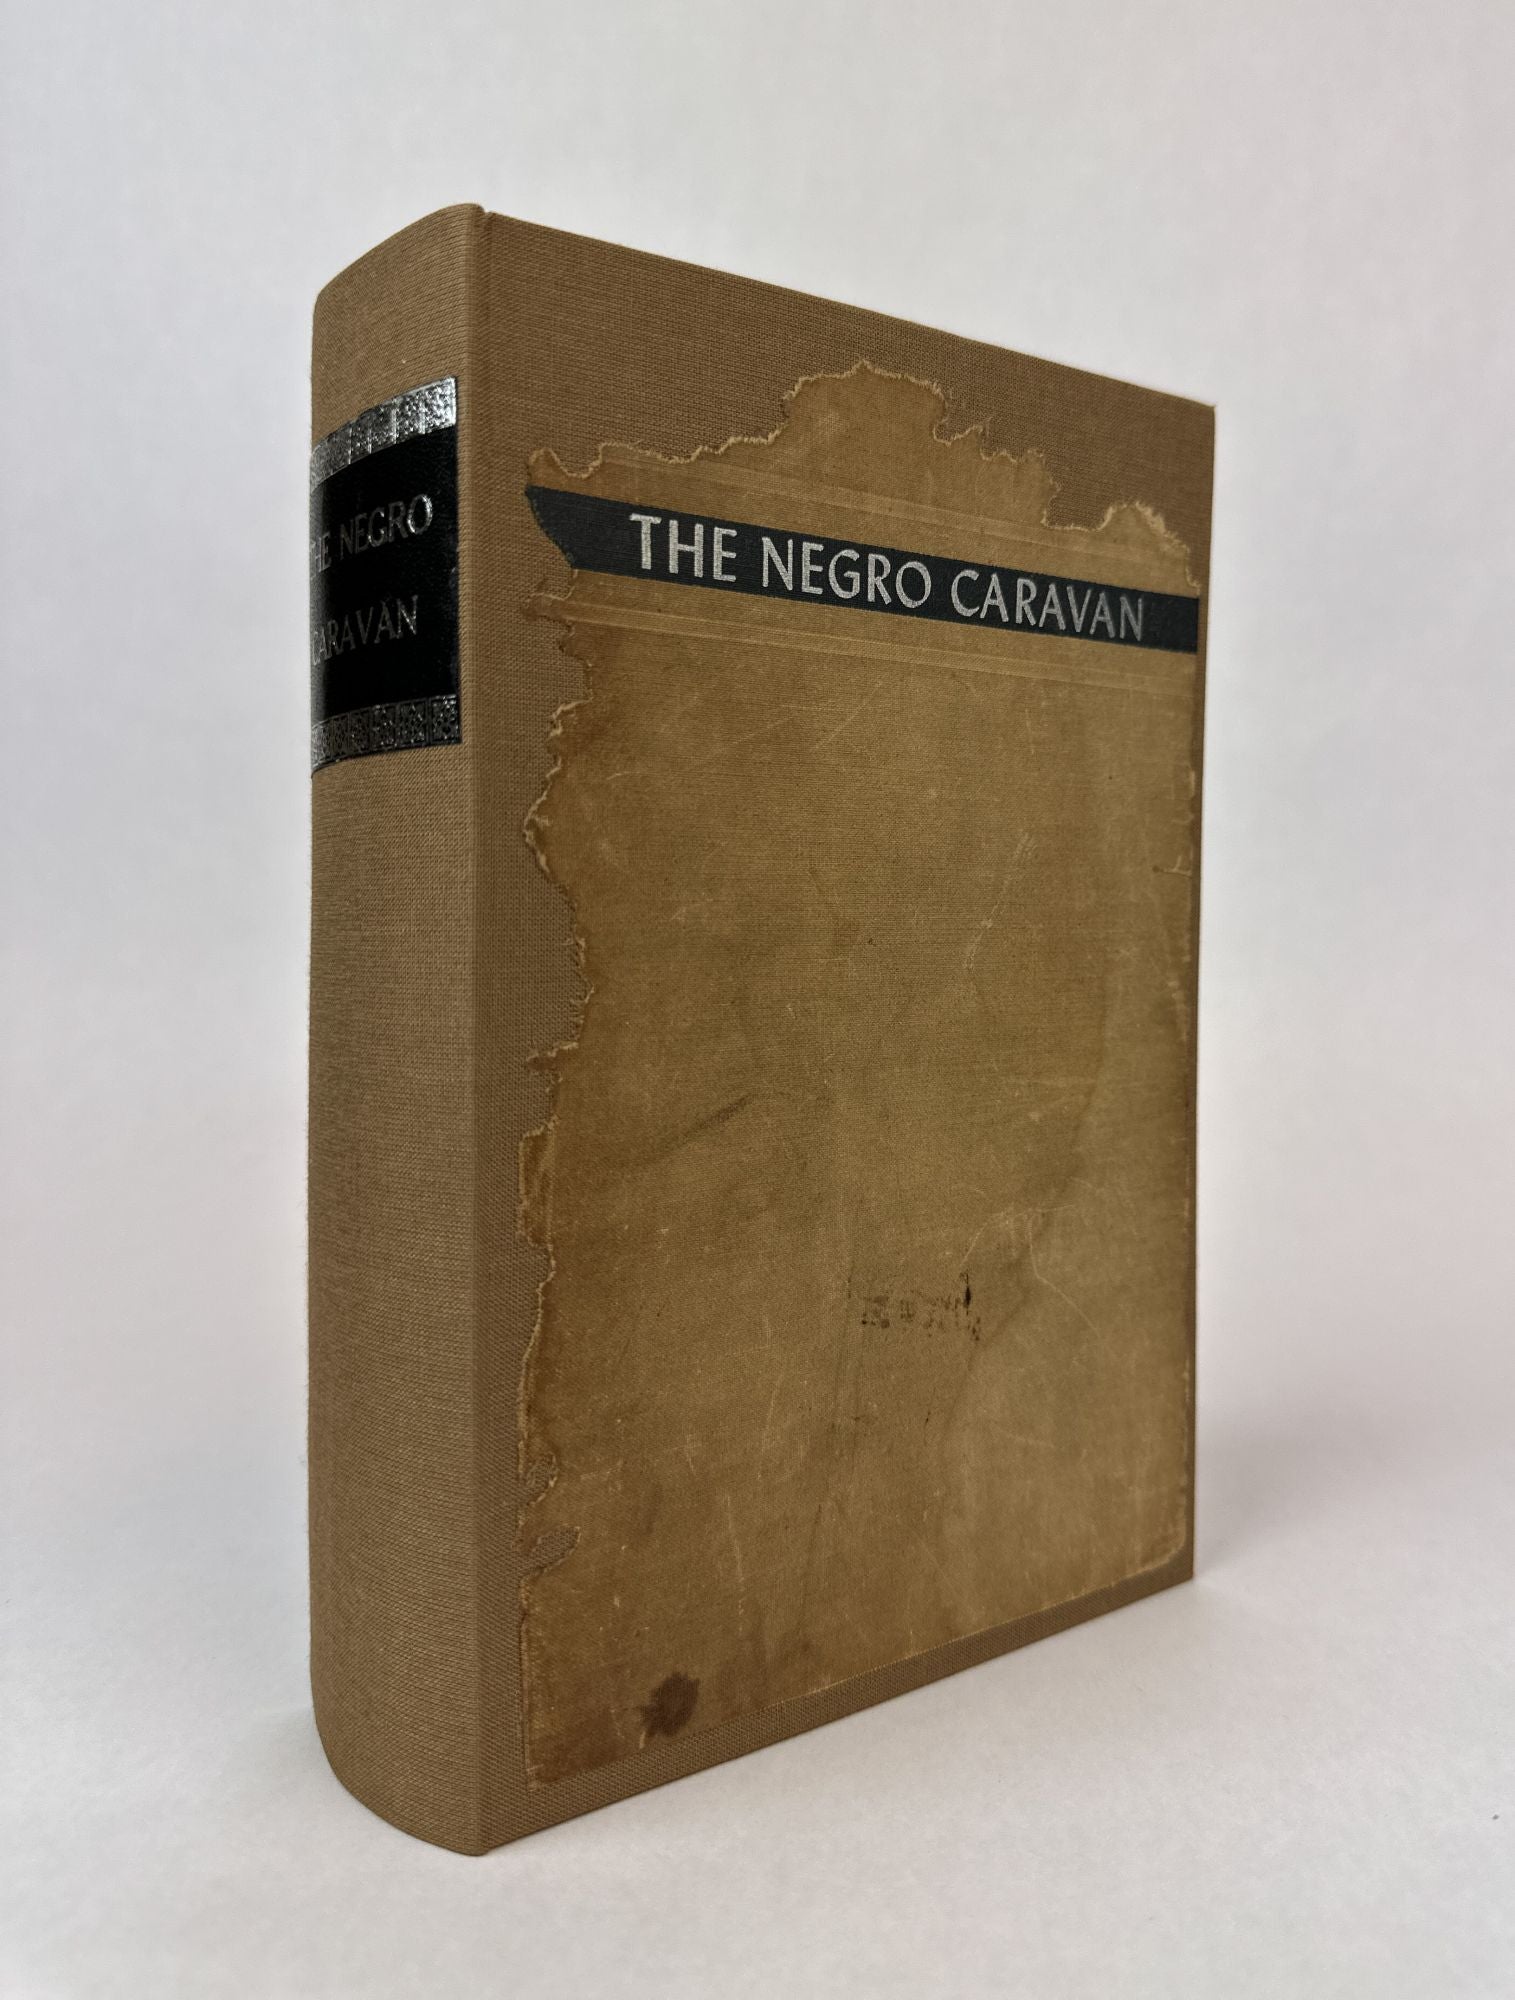 Product Image for THE NEGRO CARAVAN [Inscribed by Sterling Brown]